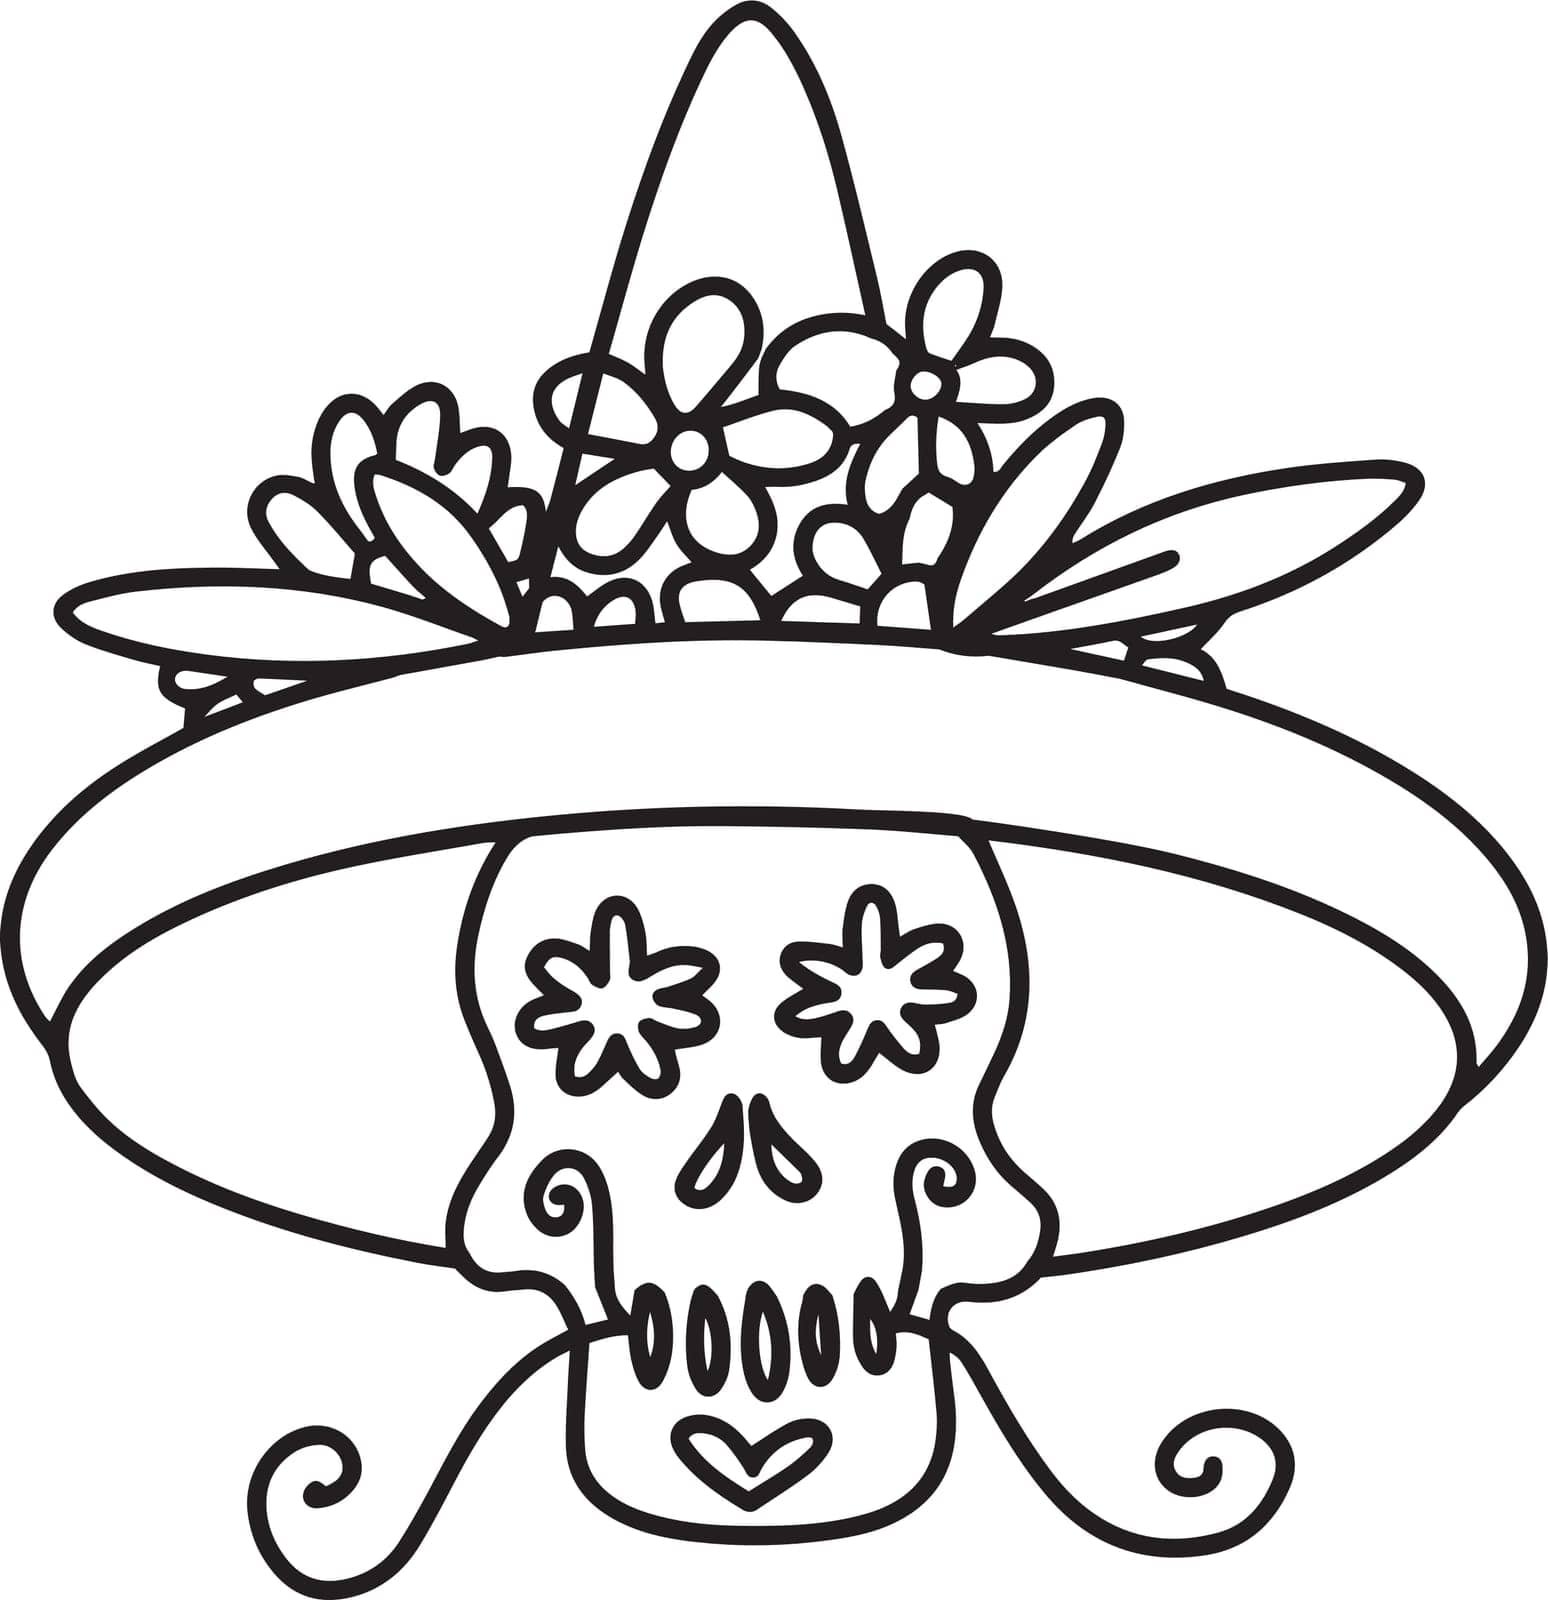 Decorated skull. Vector Illustratio by Dustick